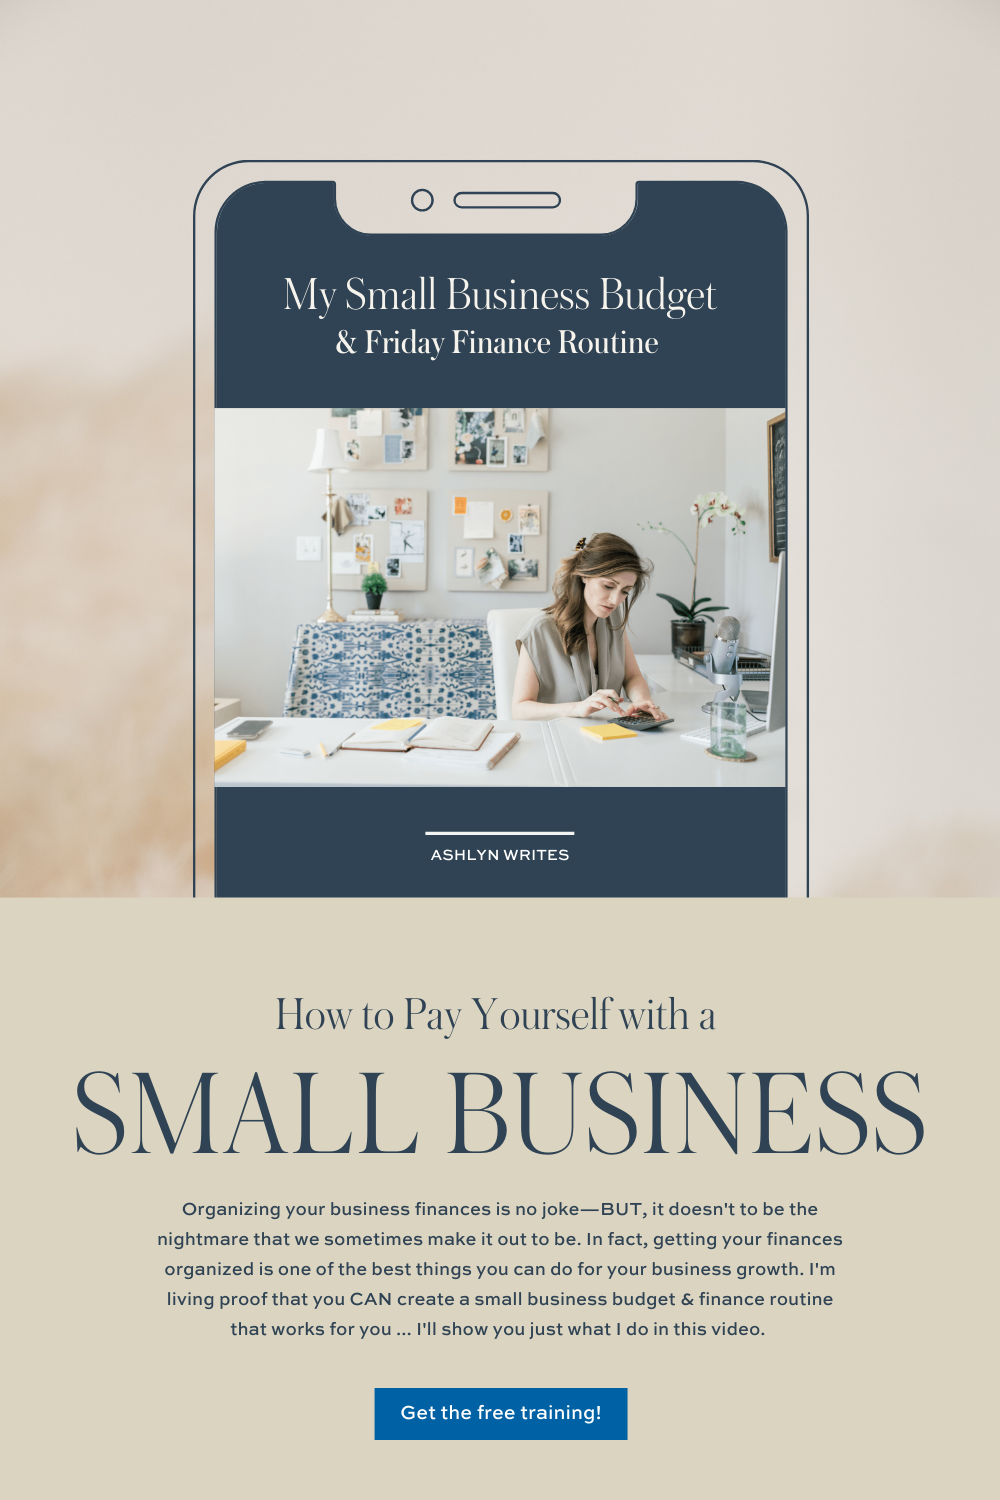 How to pay yourself as a small business | Ashlyn Writes